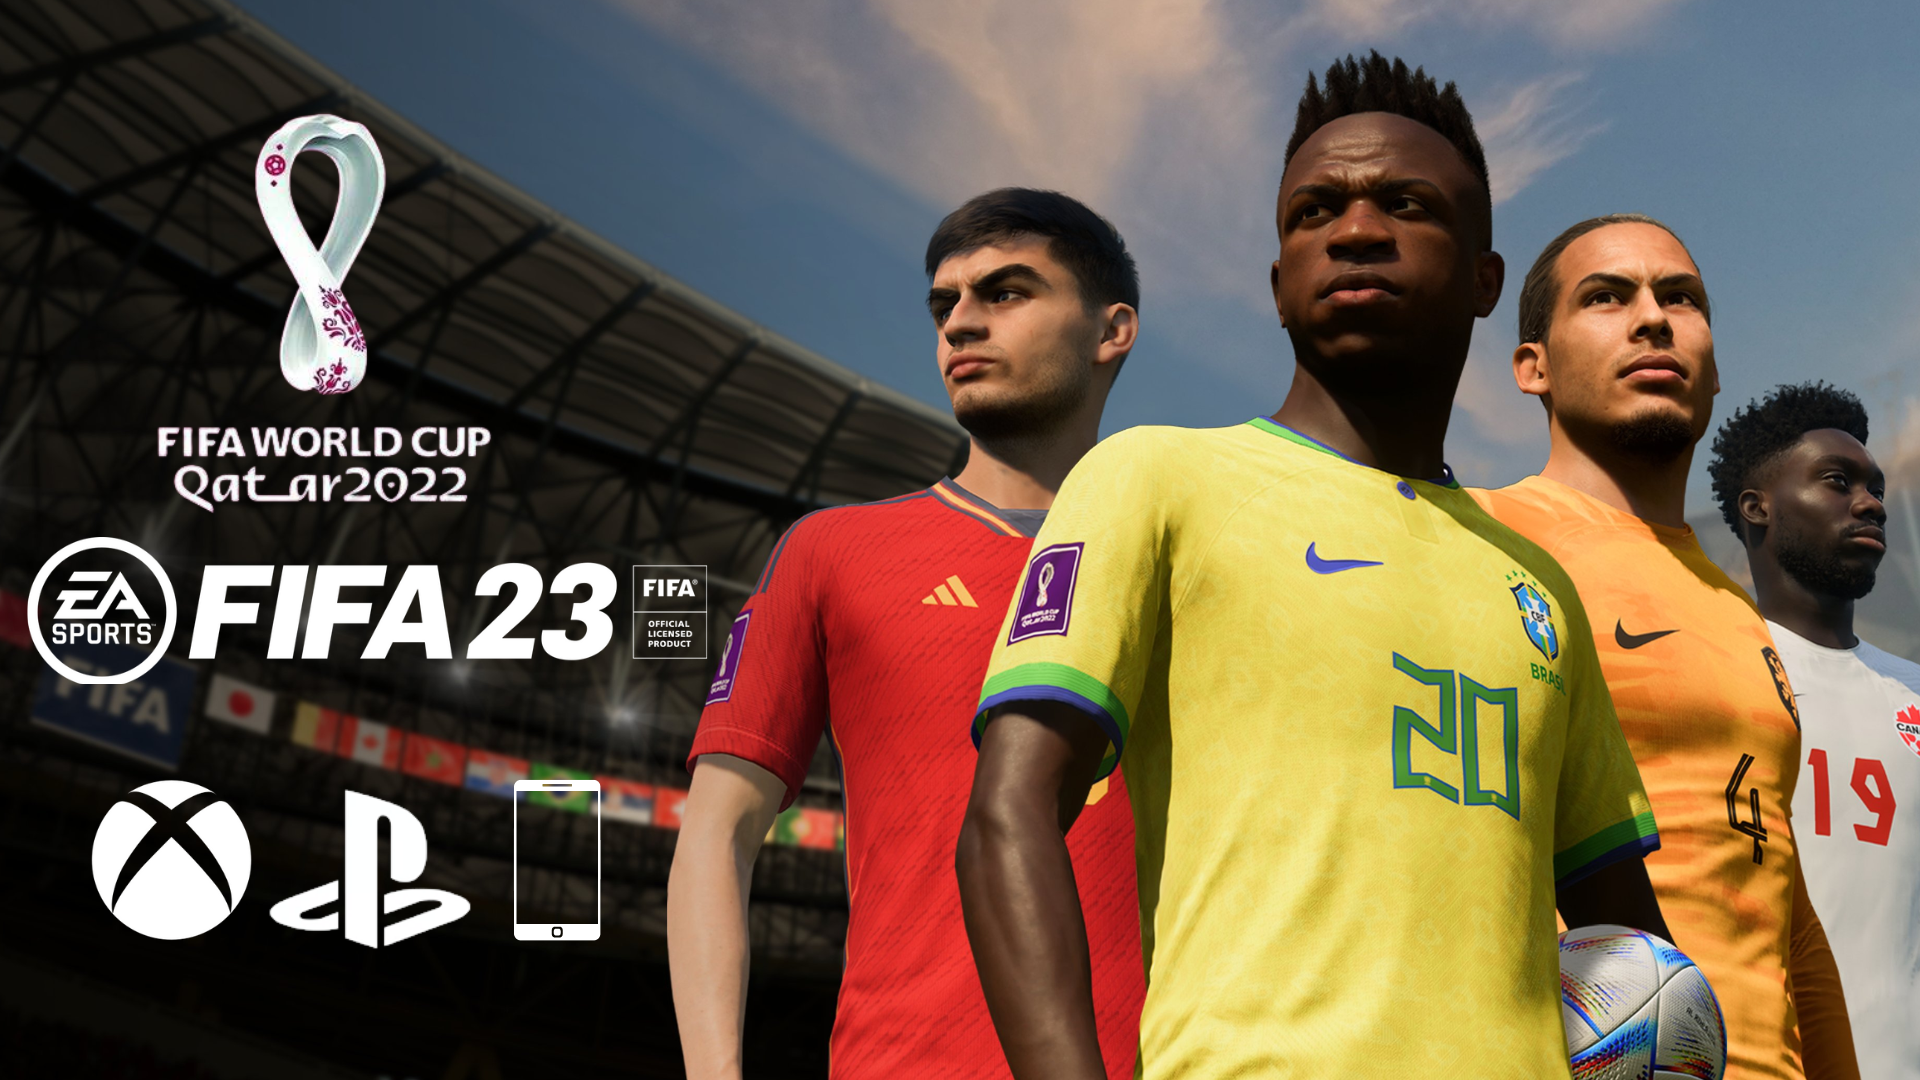 FIFA 23 FIFA 2022 World Cup Update